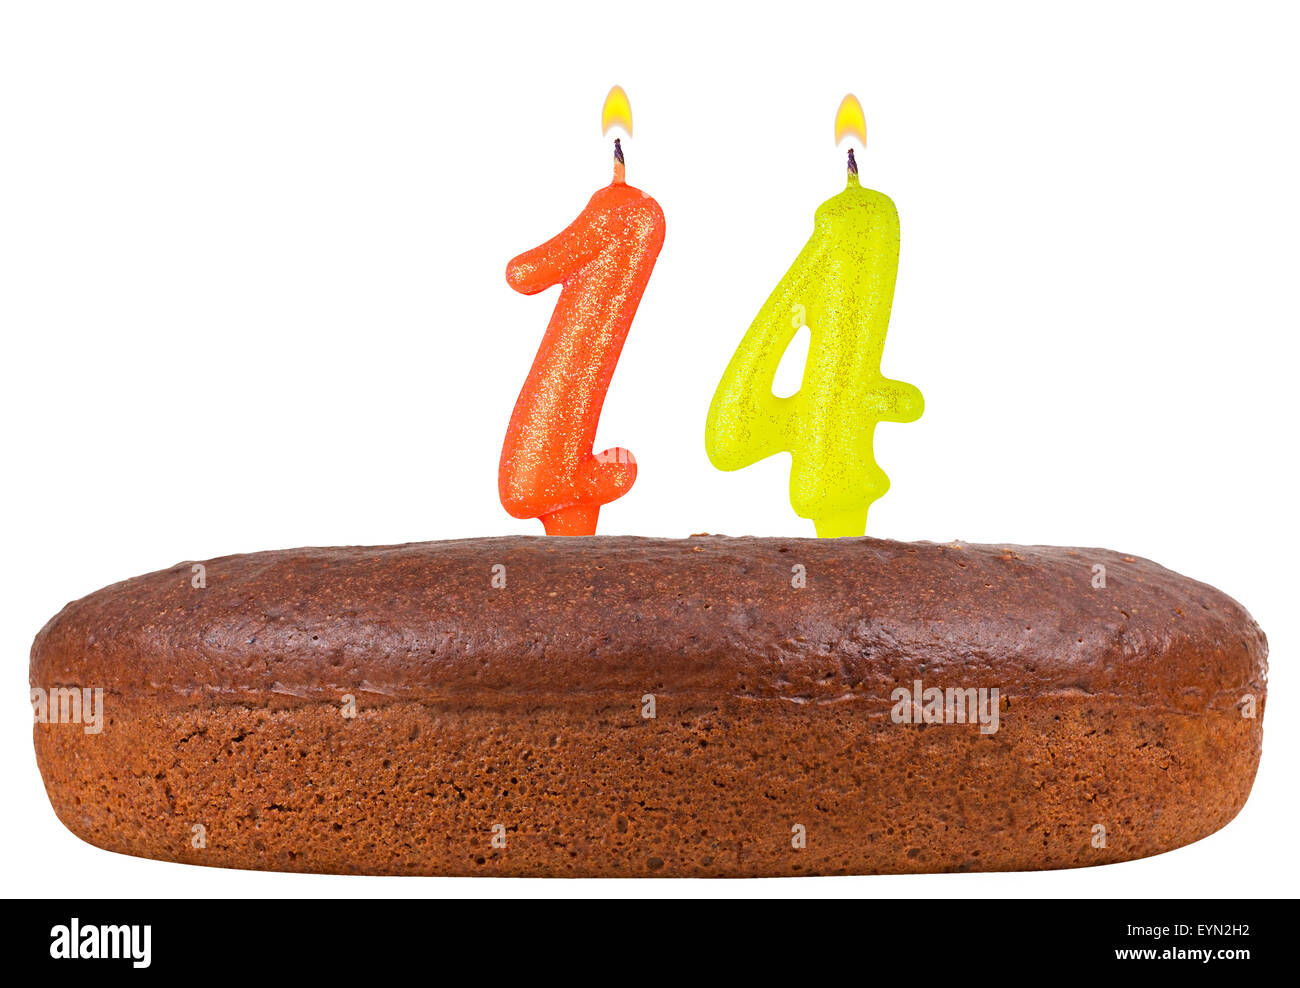 birthday cake with candles number 14 isolated on white background Stock Photo